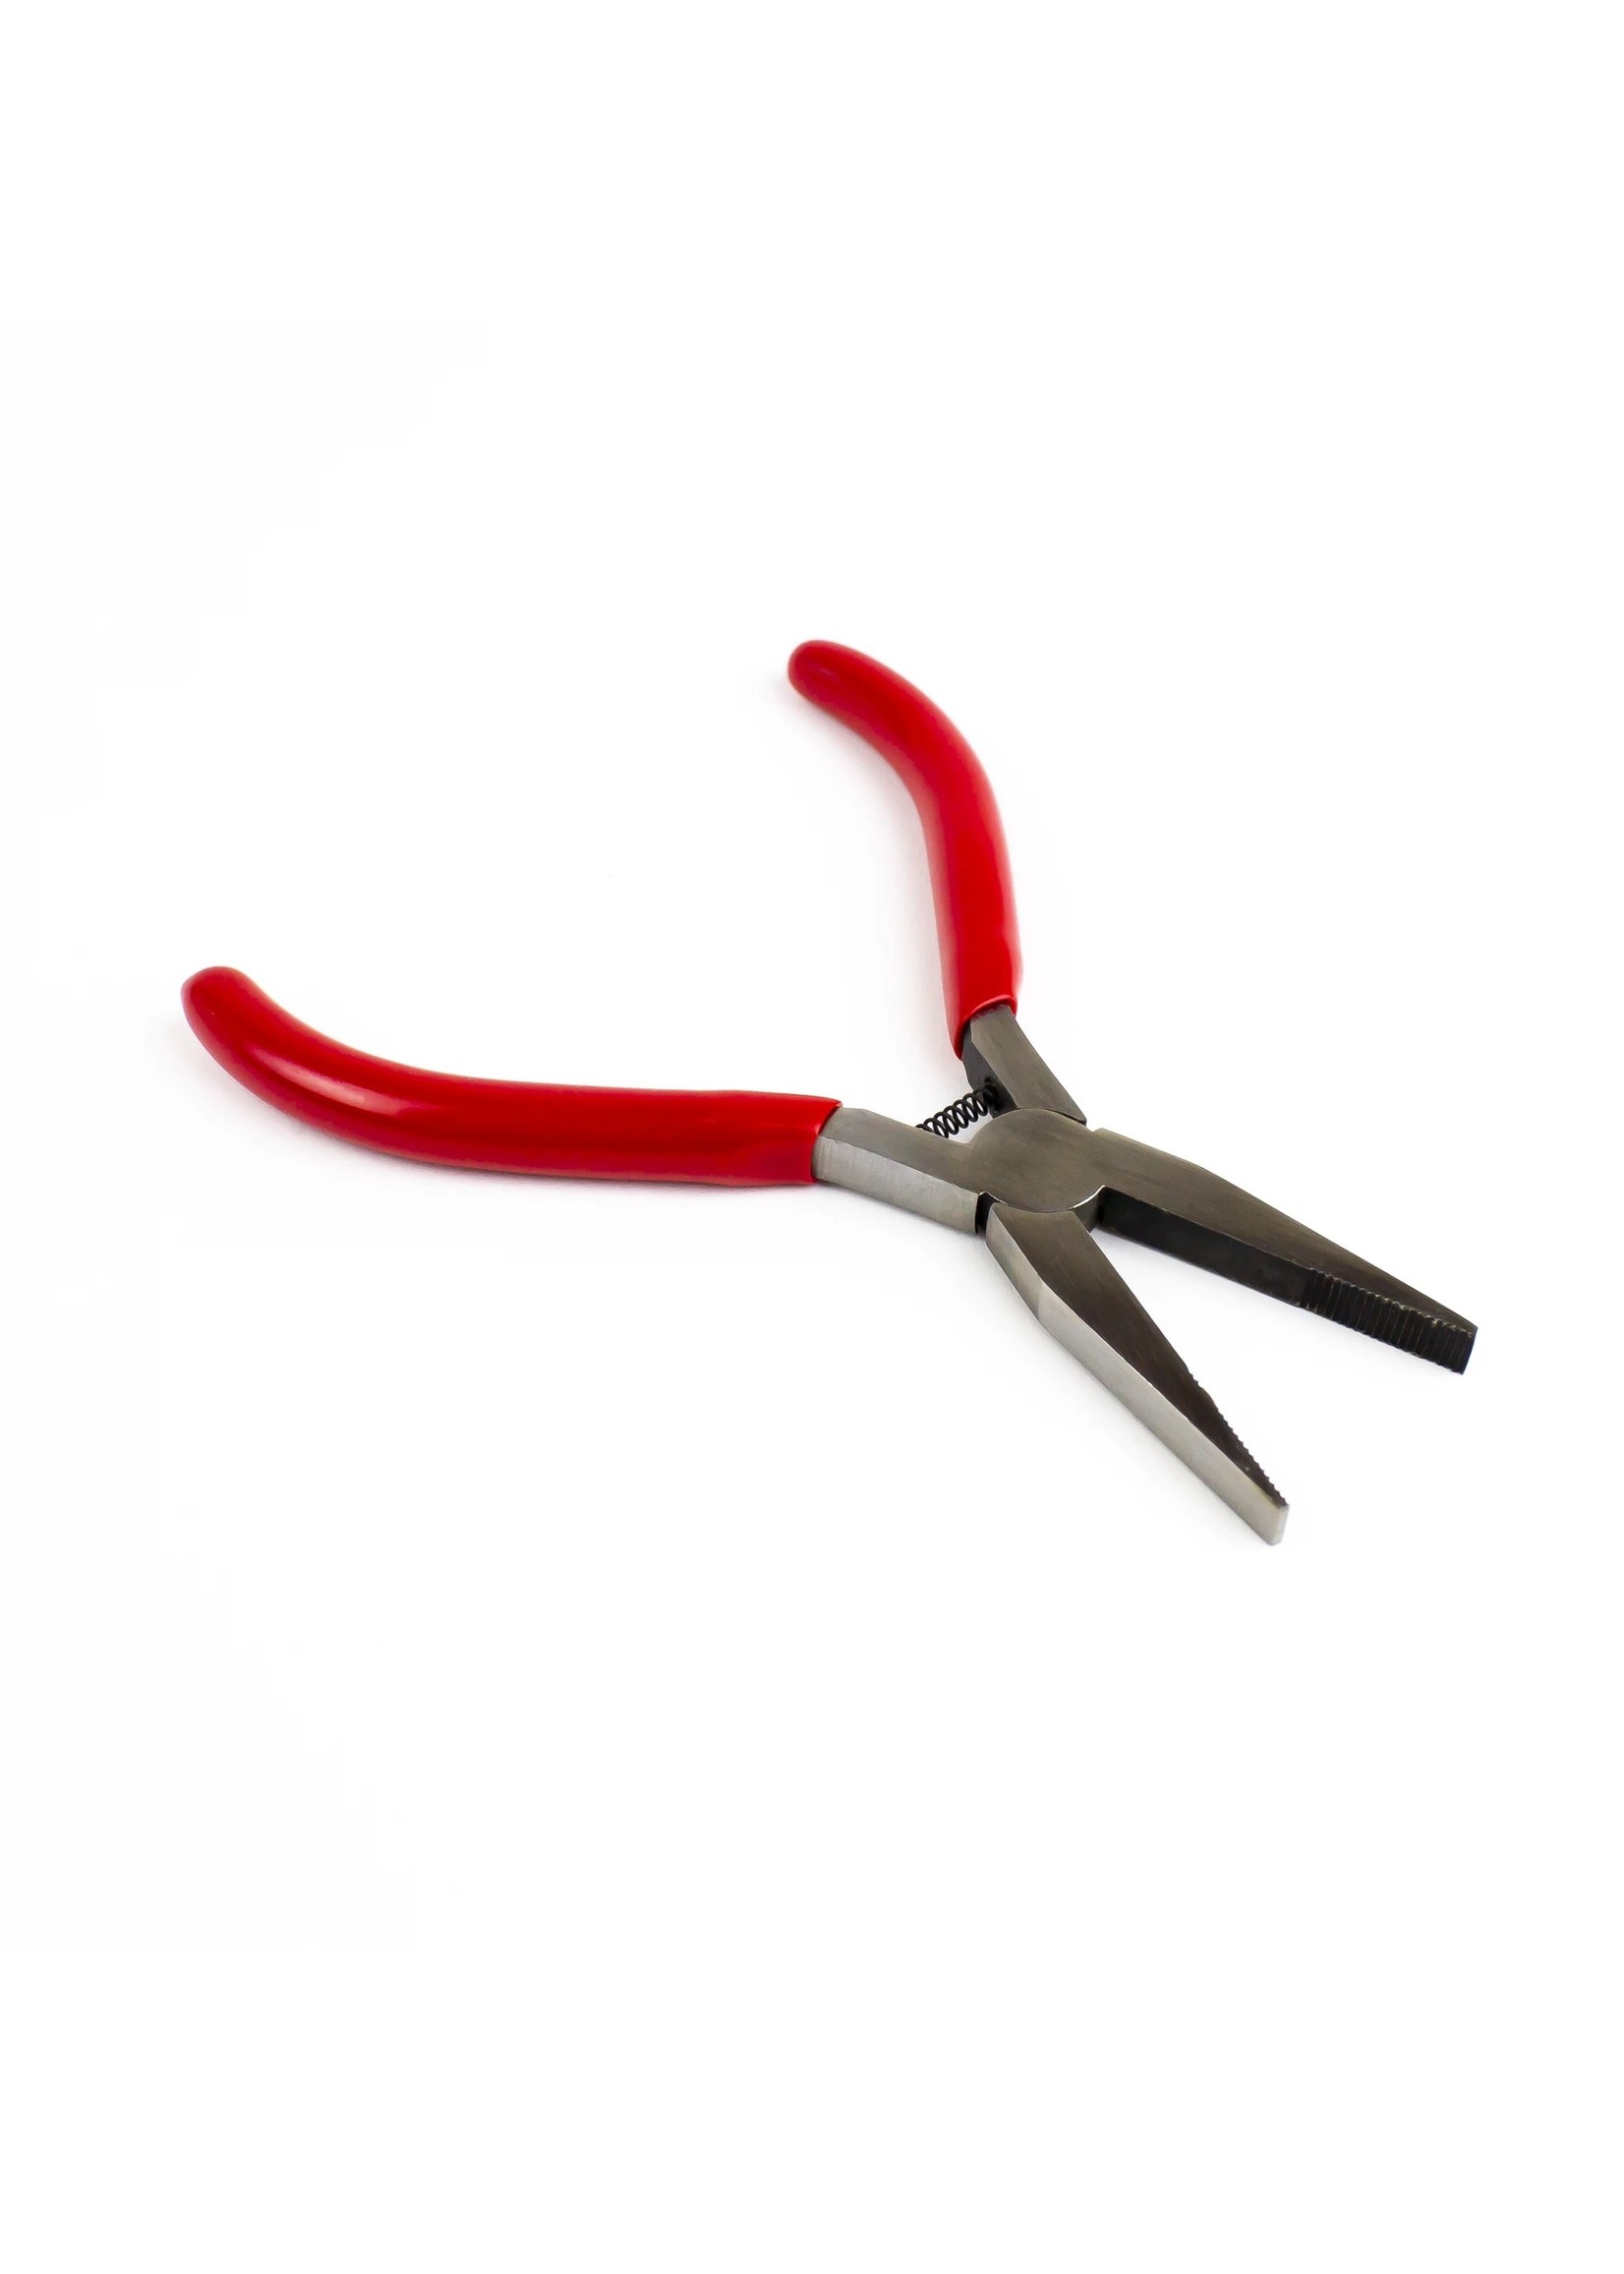 Excel 55570 - Flat Nose Pliers - Hub Hobby